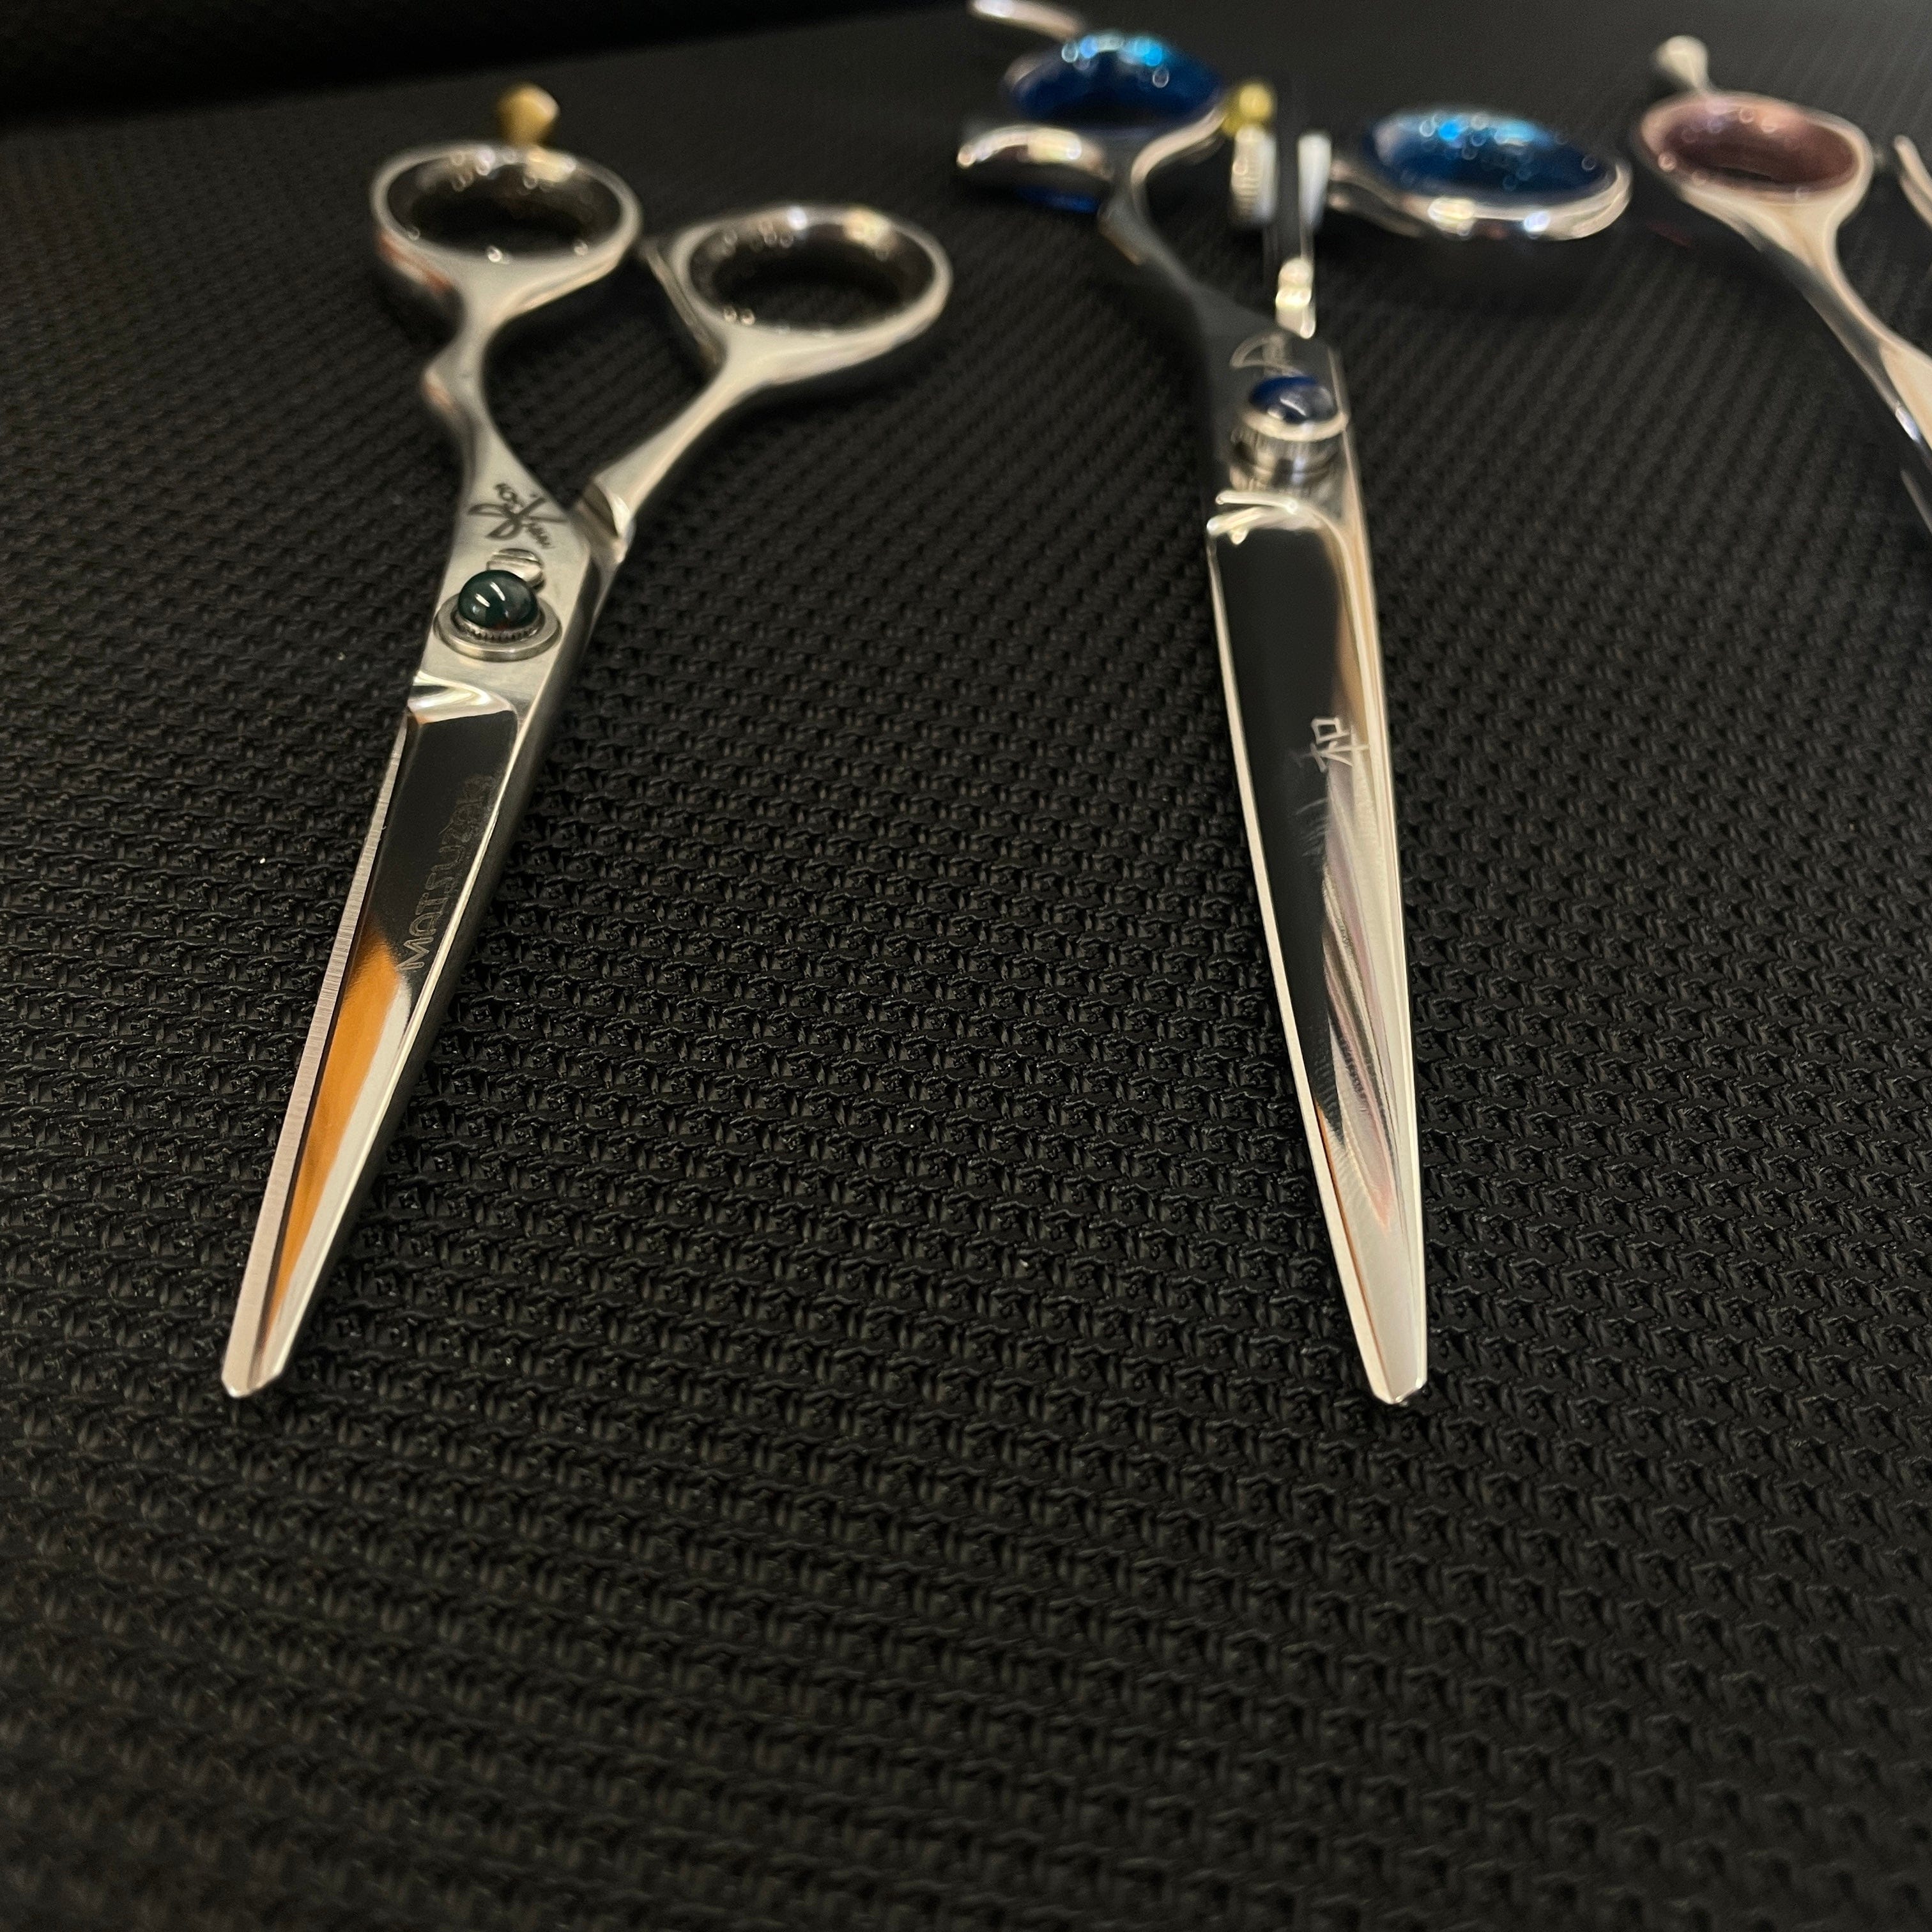 MAIL OUT SHARPENING SERVICE FOR ONE PAIR OF SHEARS